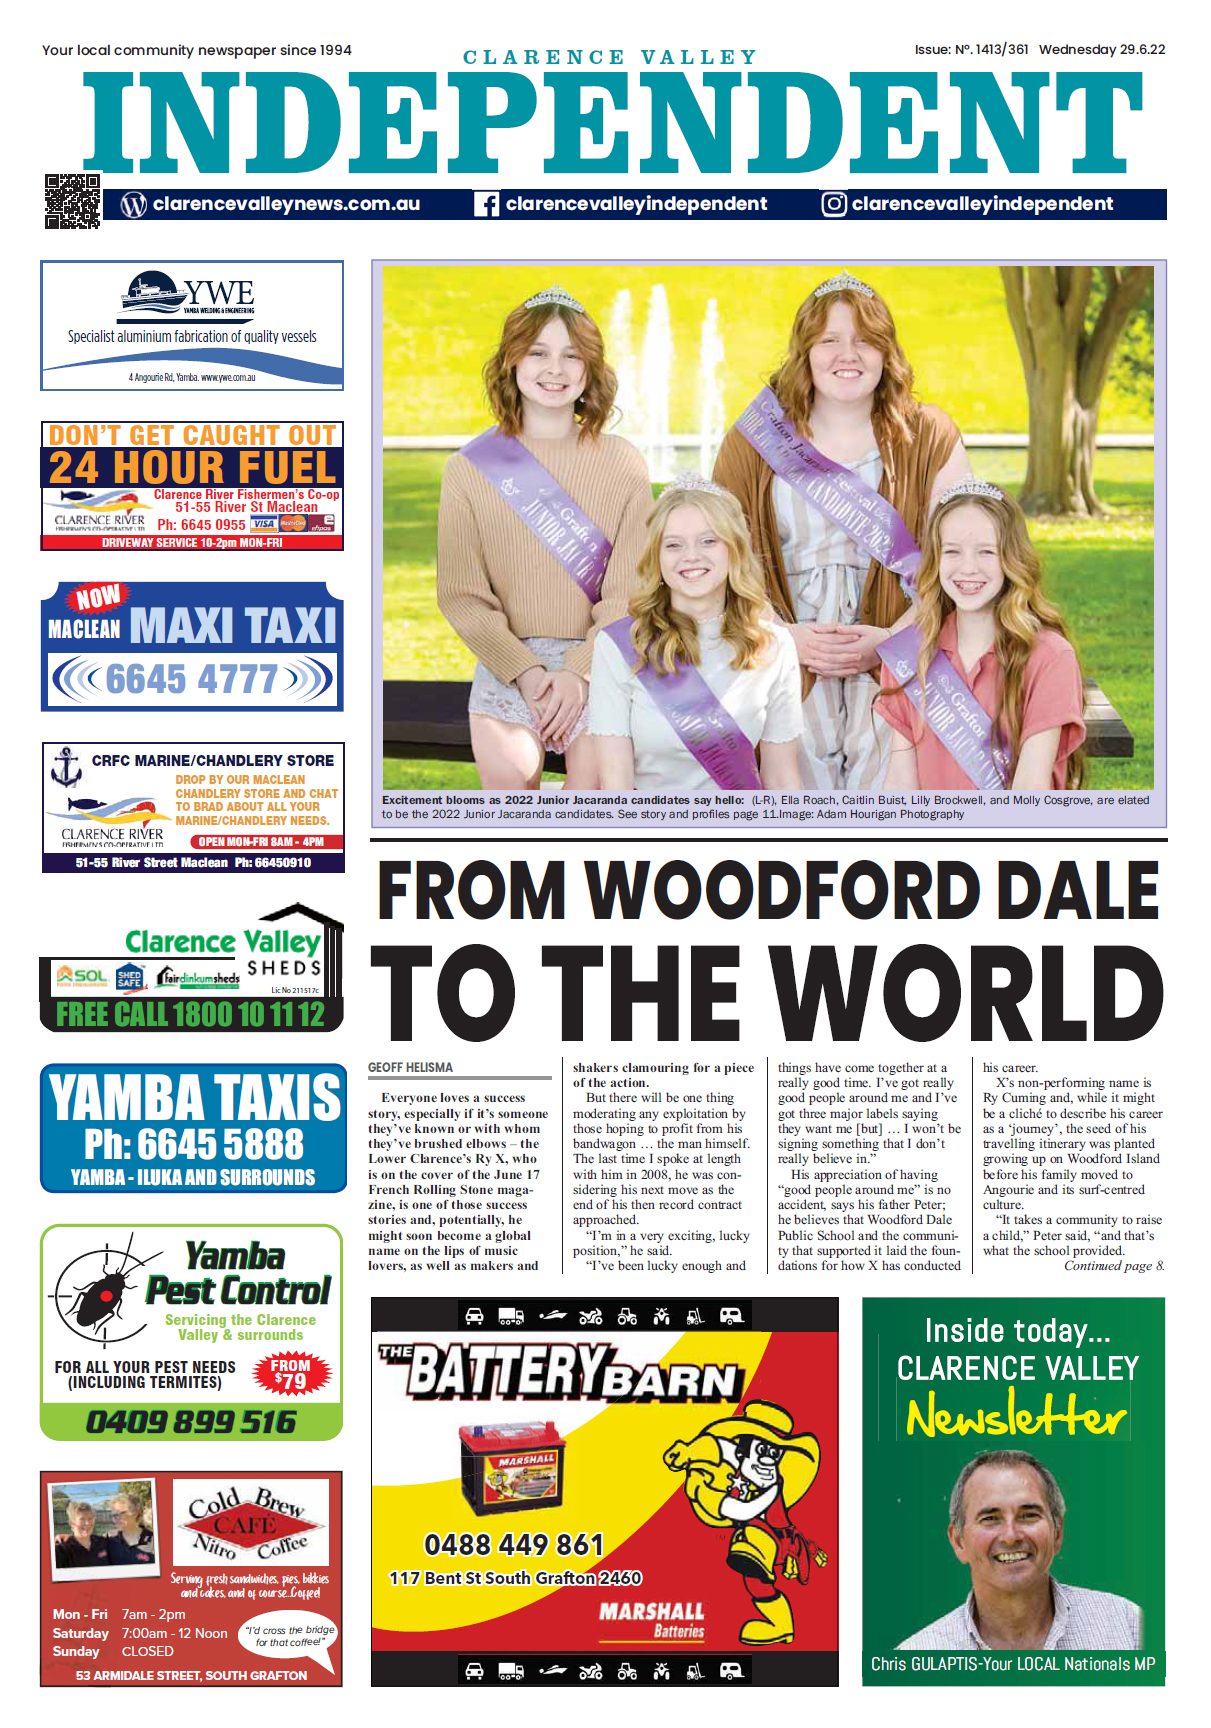 Clarence Valley Independent 29 June 2022